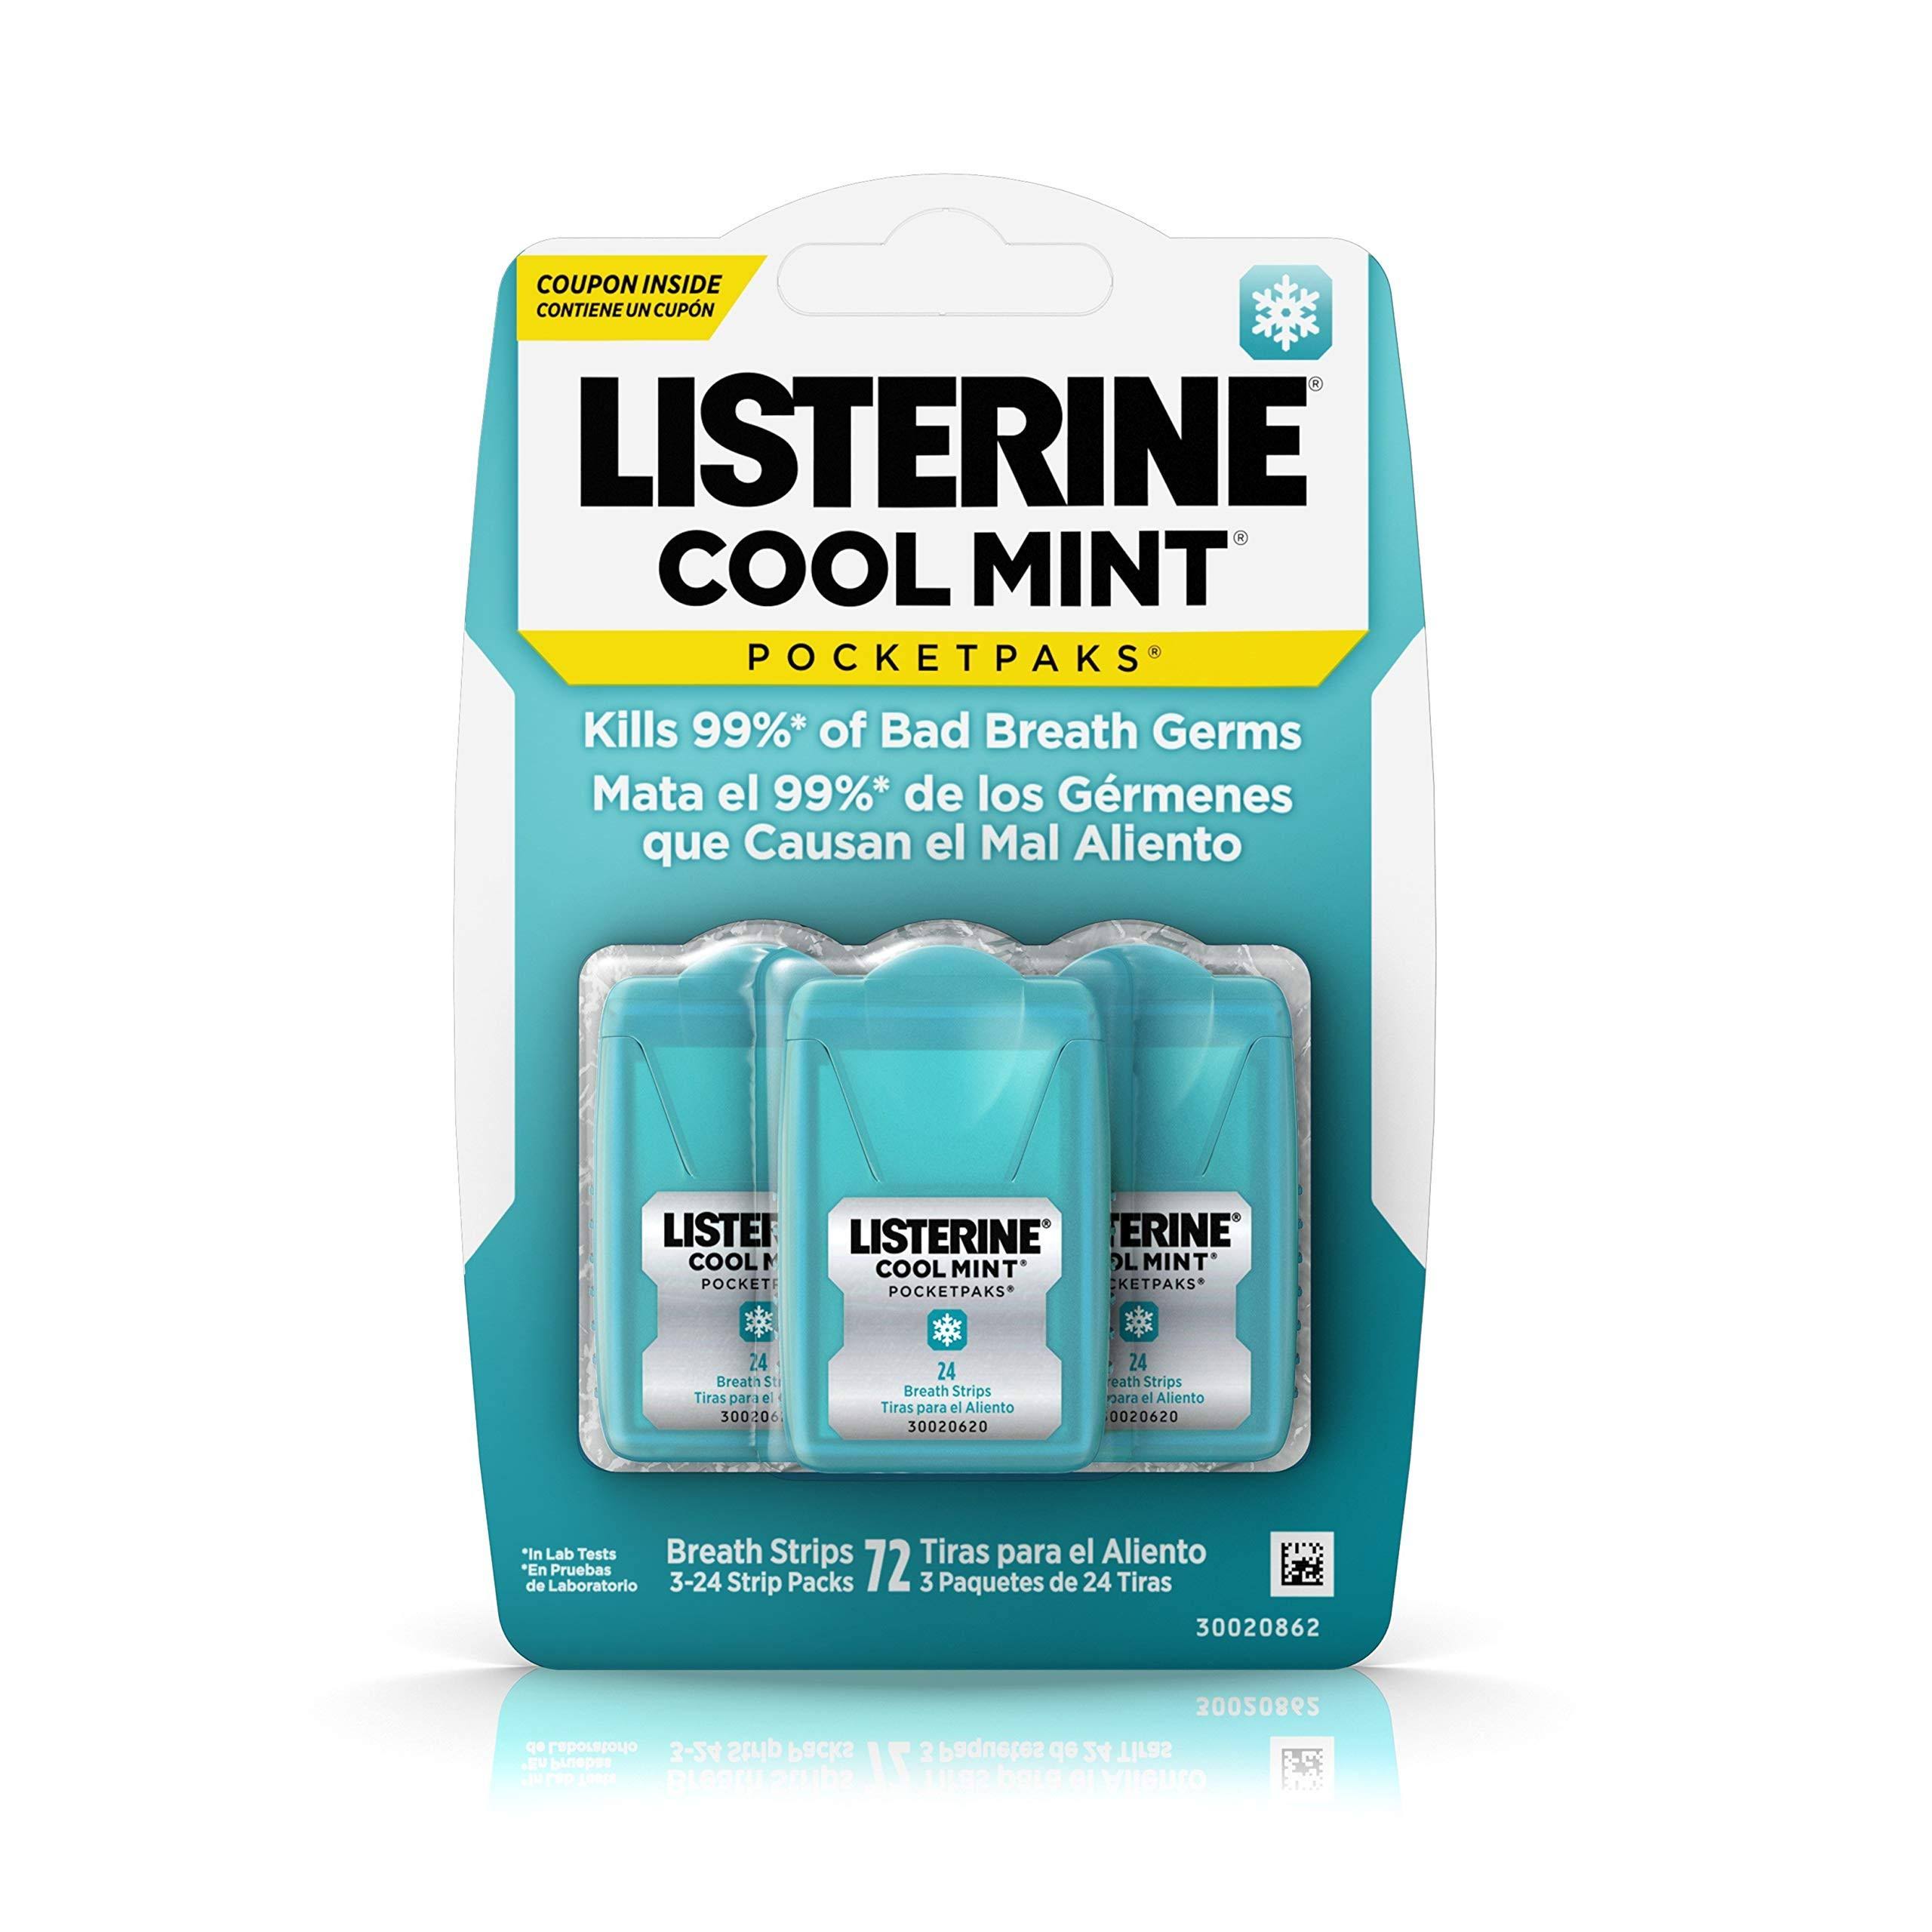 Listerine Pocketpaks Breath Strips - Cool Mint, 24 Count, 3 Pack